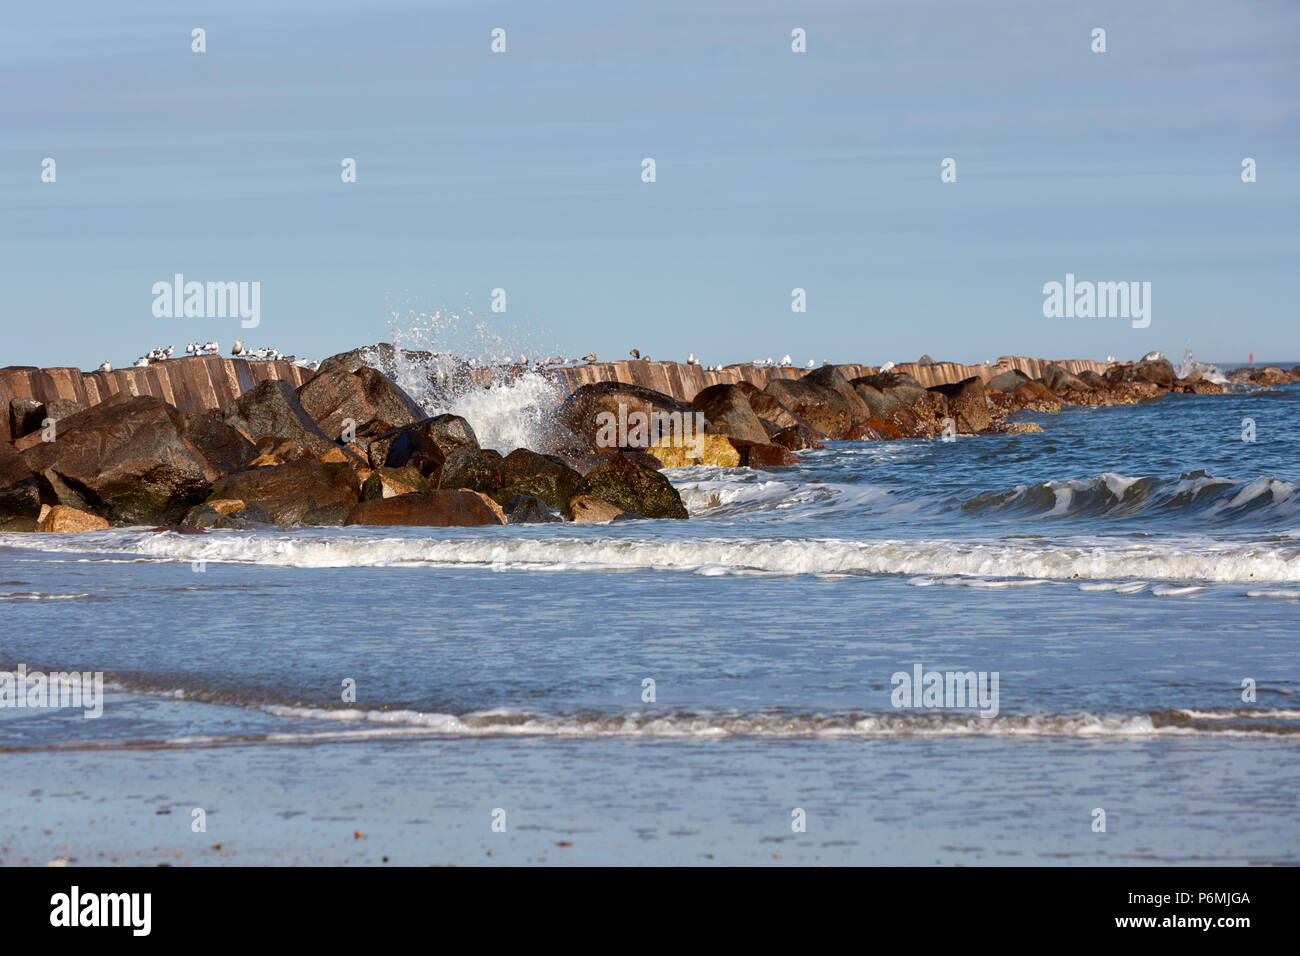 Waves crashing against a breakwall lined with sea birds Stock Photo